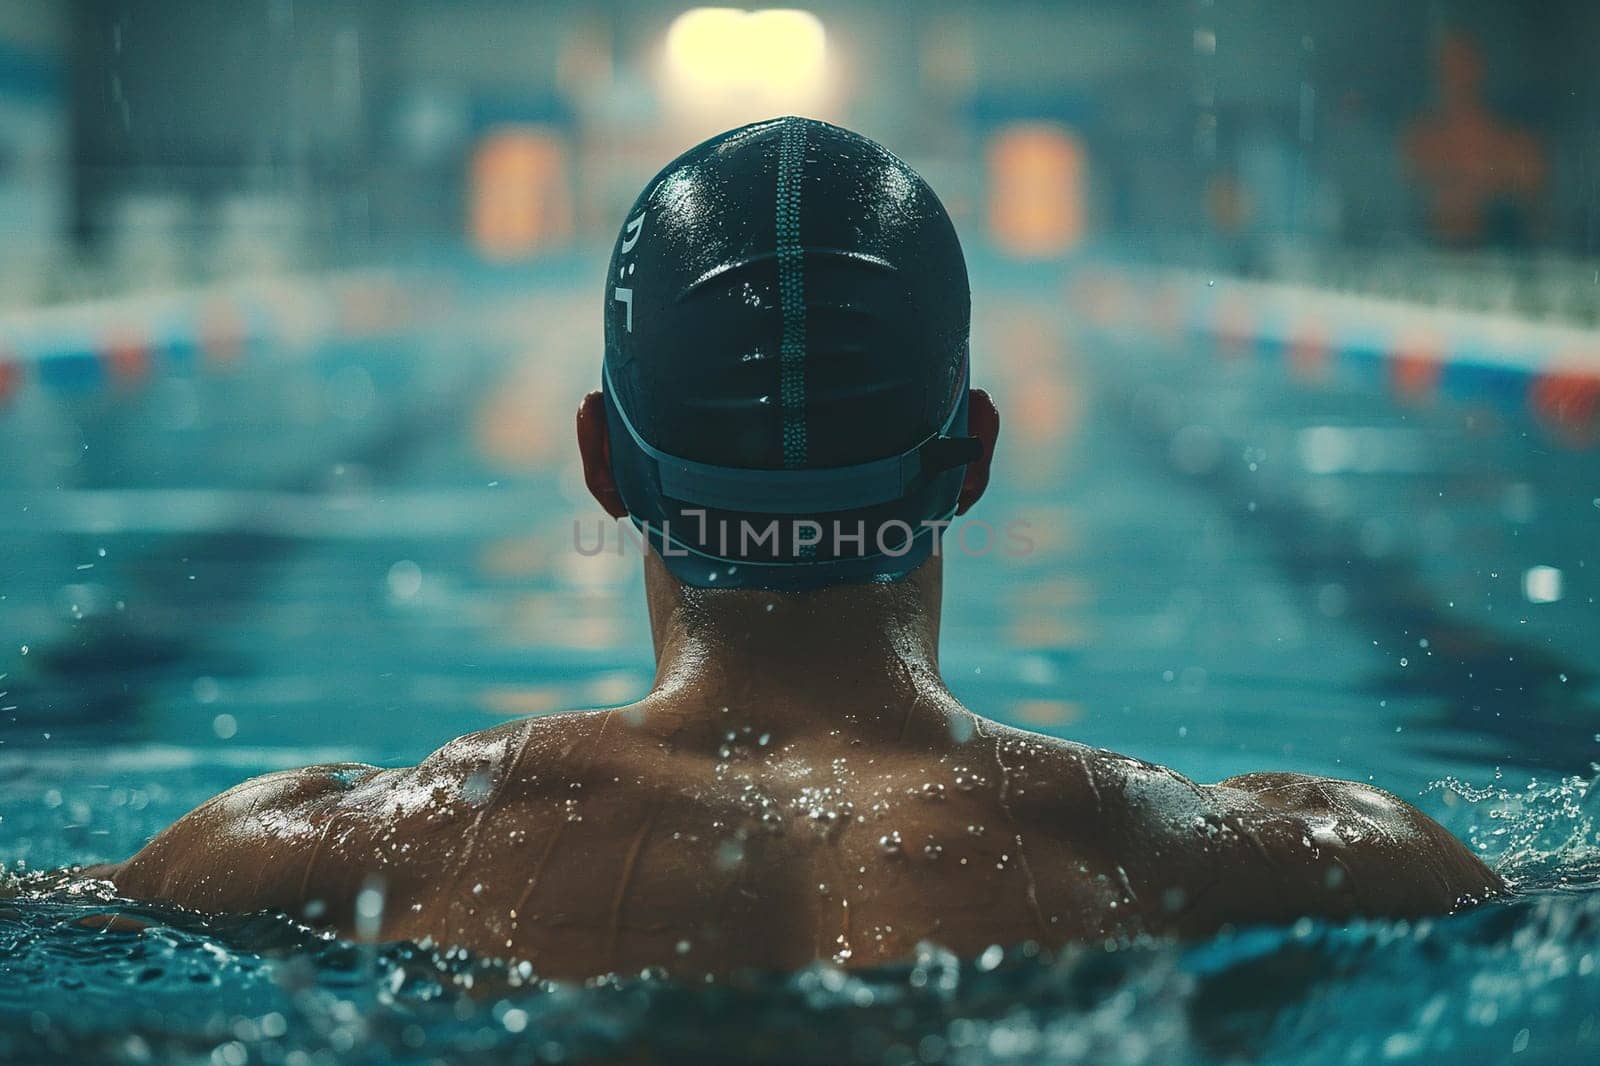 Back view of professional swimmer in pool cap training in the pool